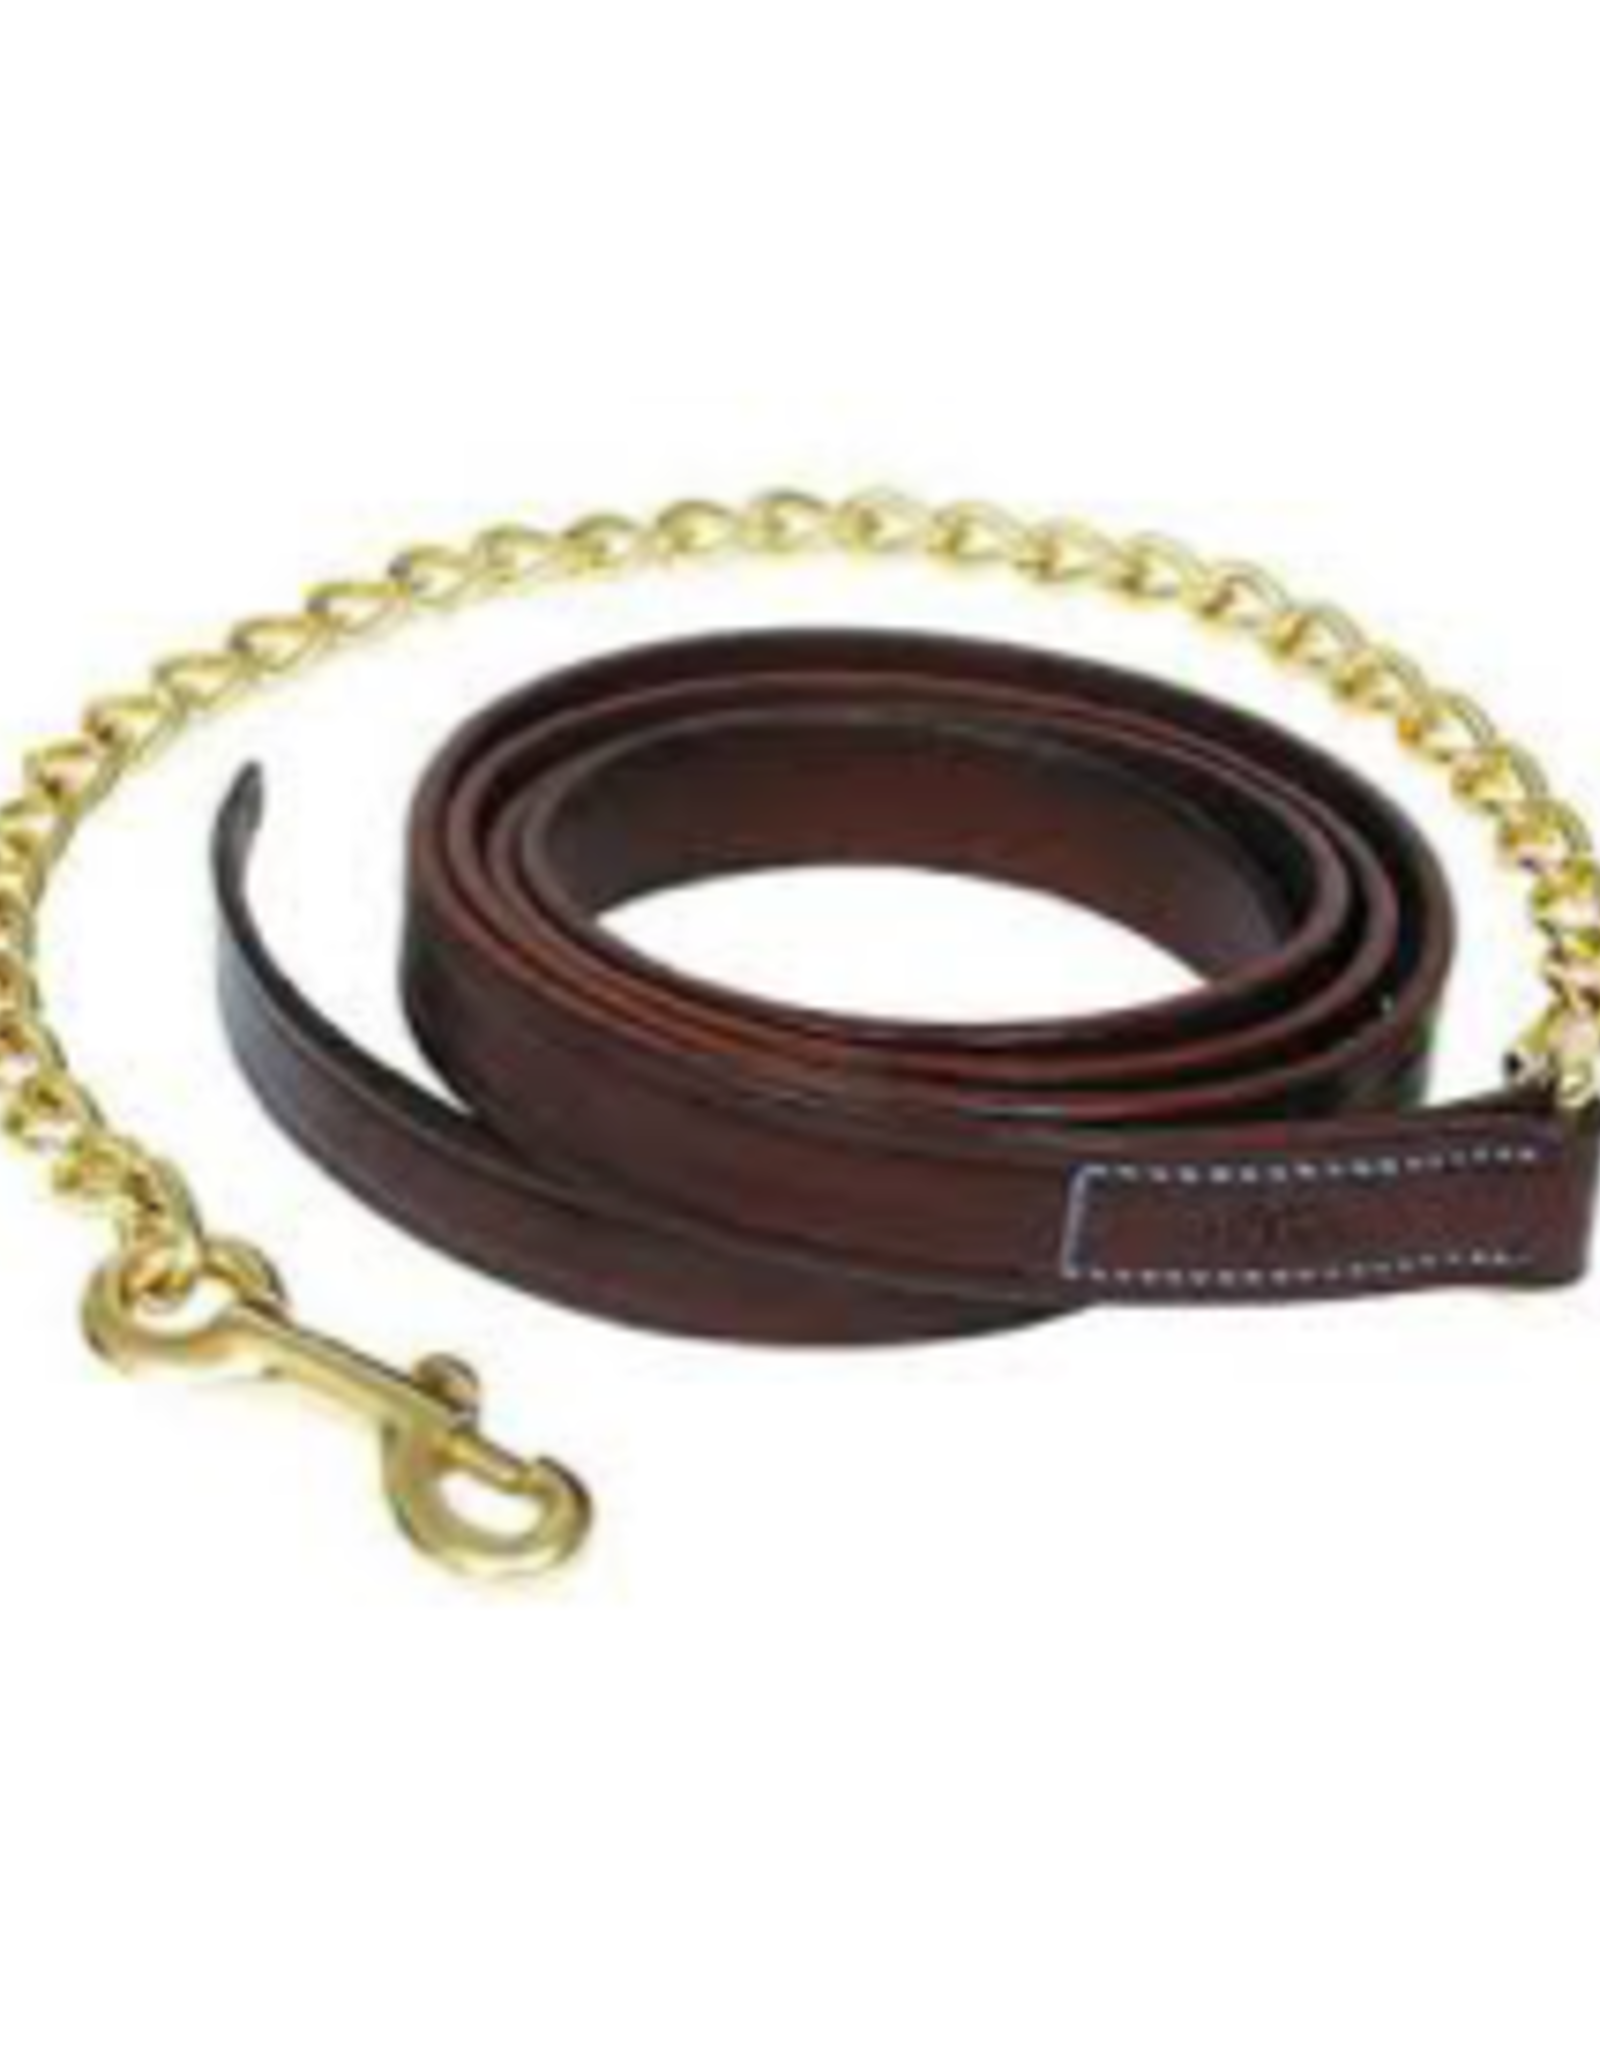 Walsh Leather Lead with Chain